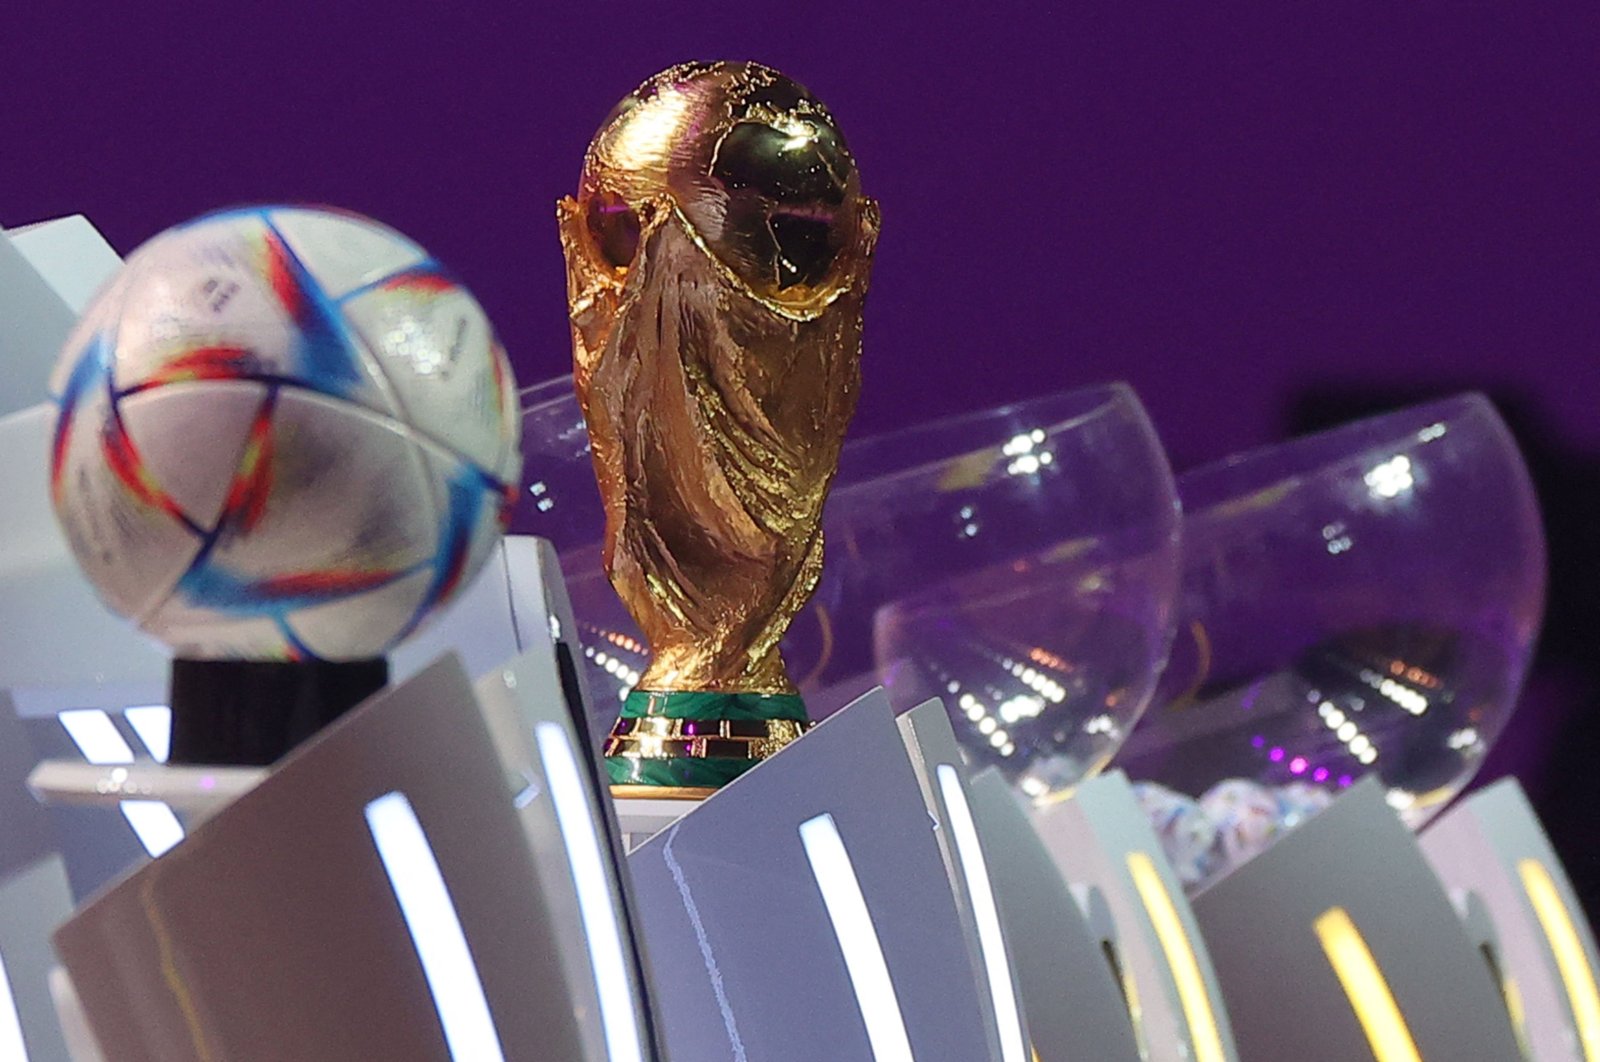 The FIFA World Cup trophy and the official 2022 World Cup ball is seen in Doha, Qatar, April 1, 2022 (AFP Photo)